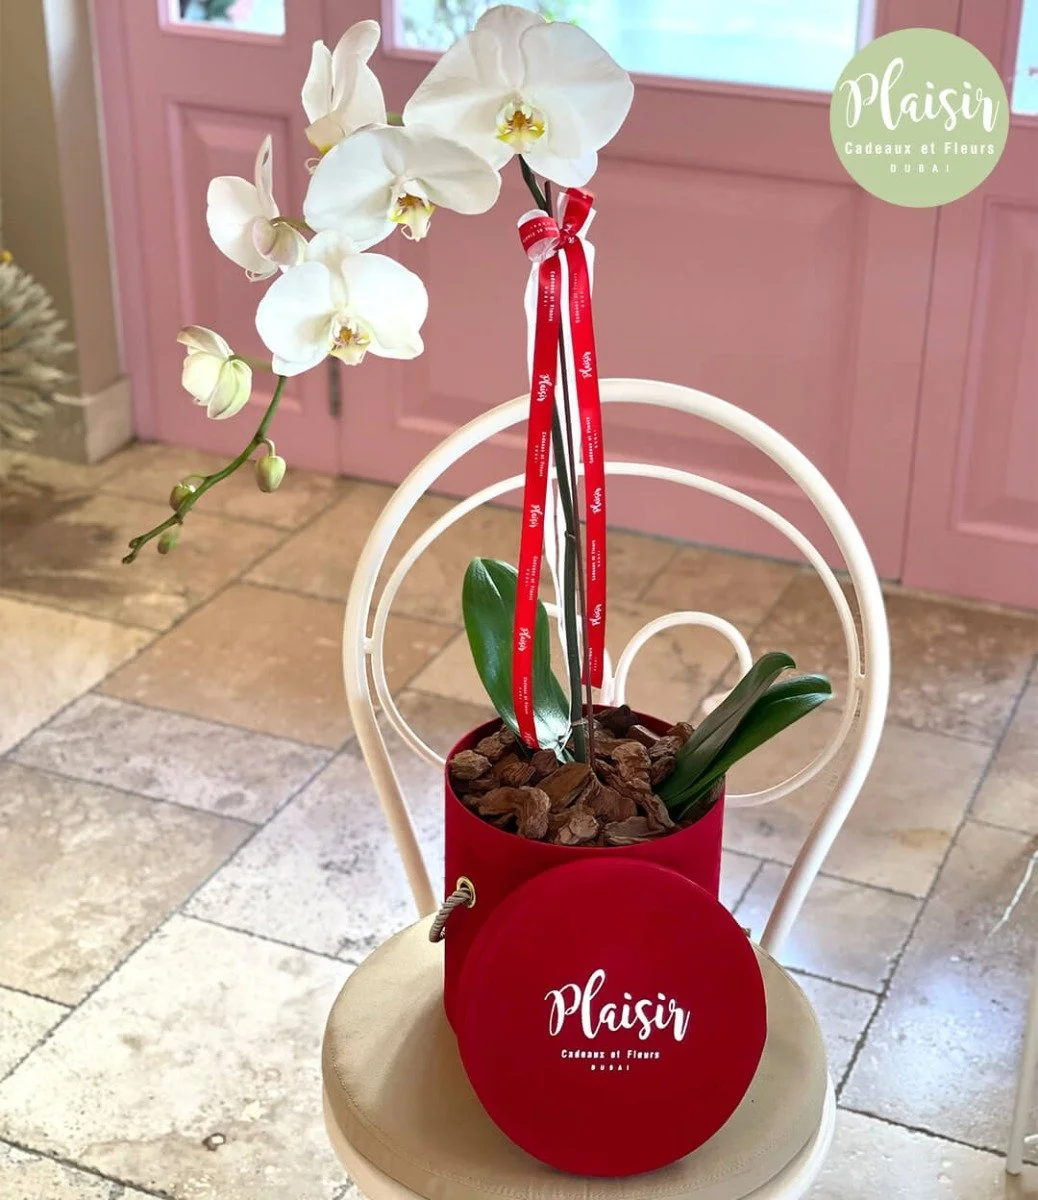 Single Note White Orchid in Red Box By Plaisir